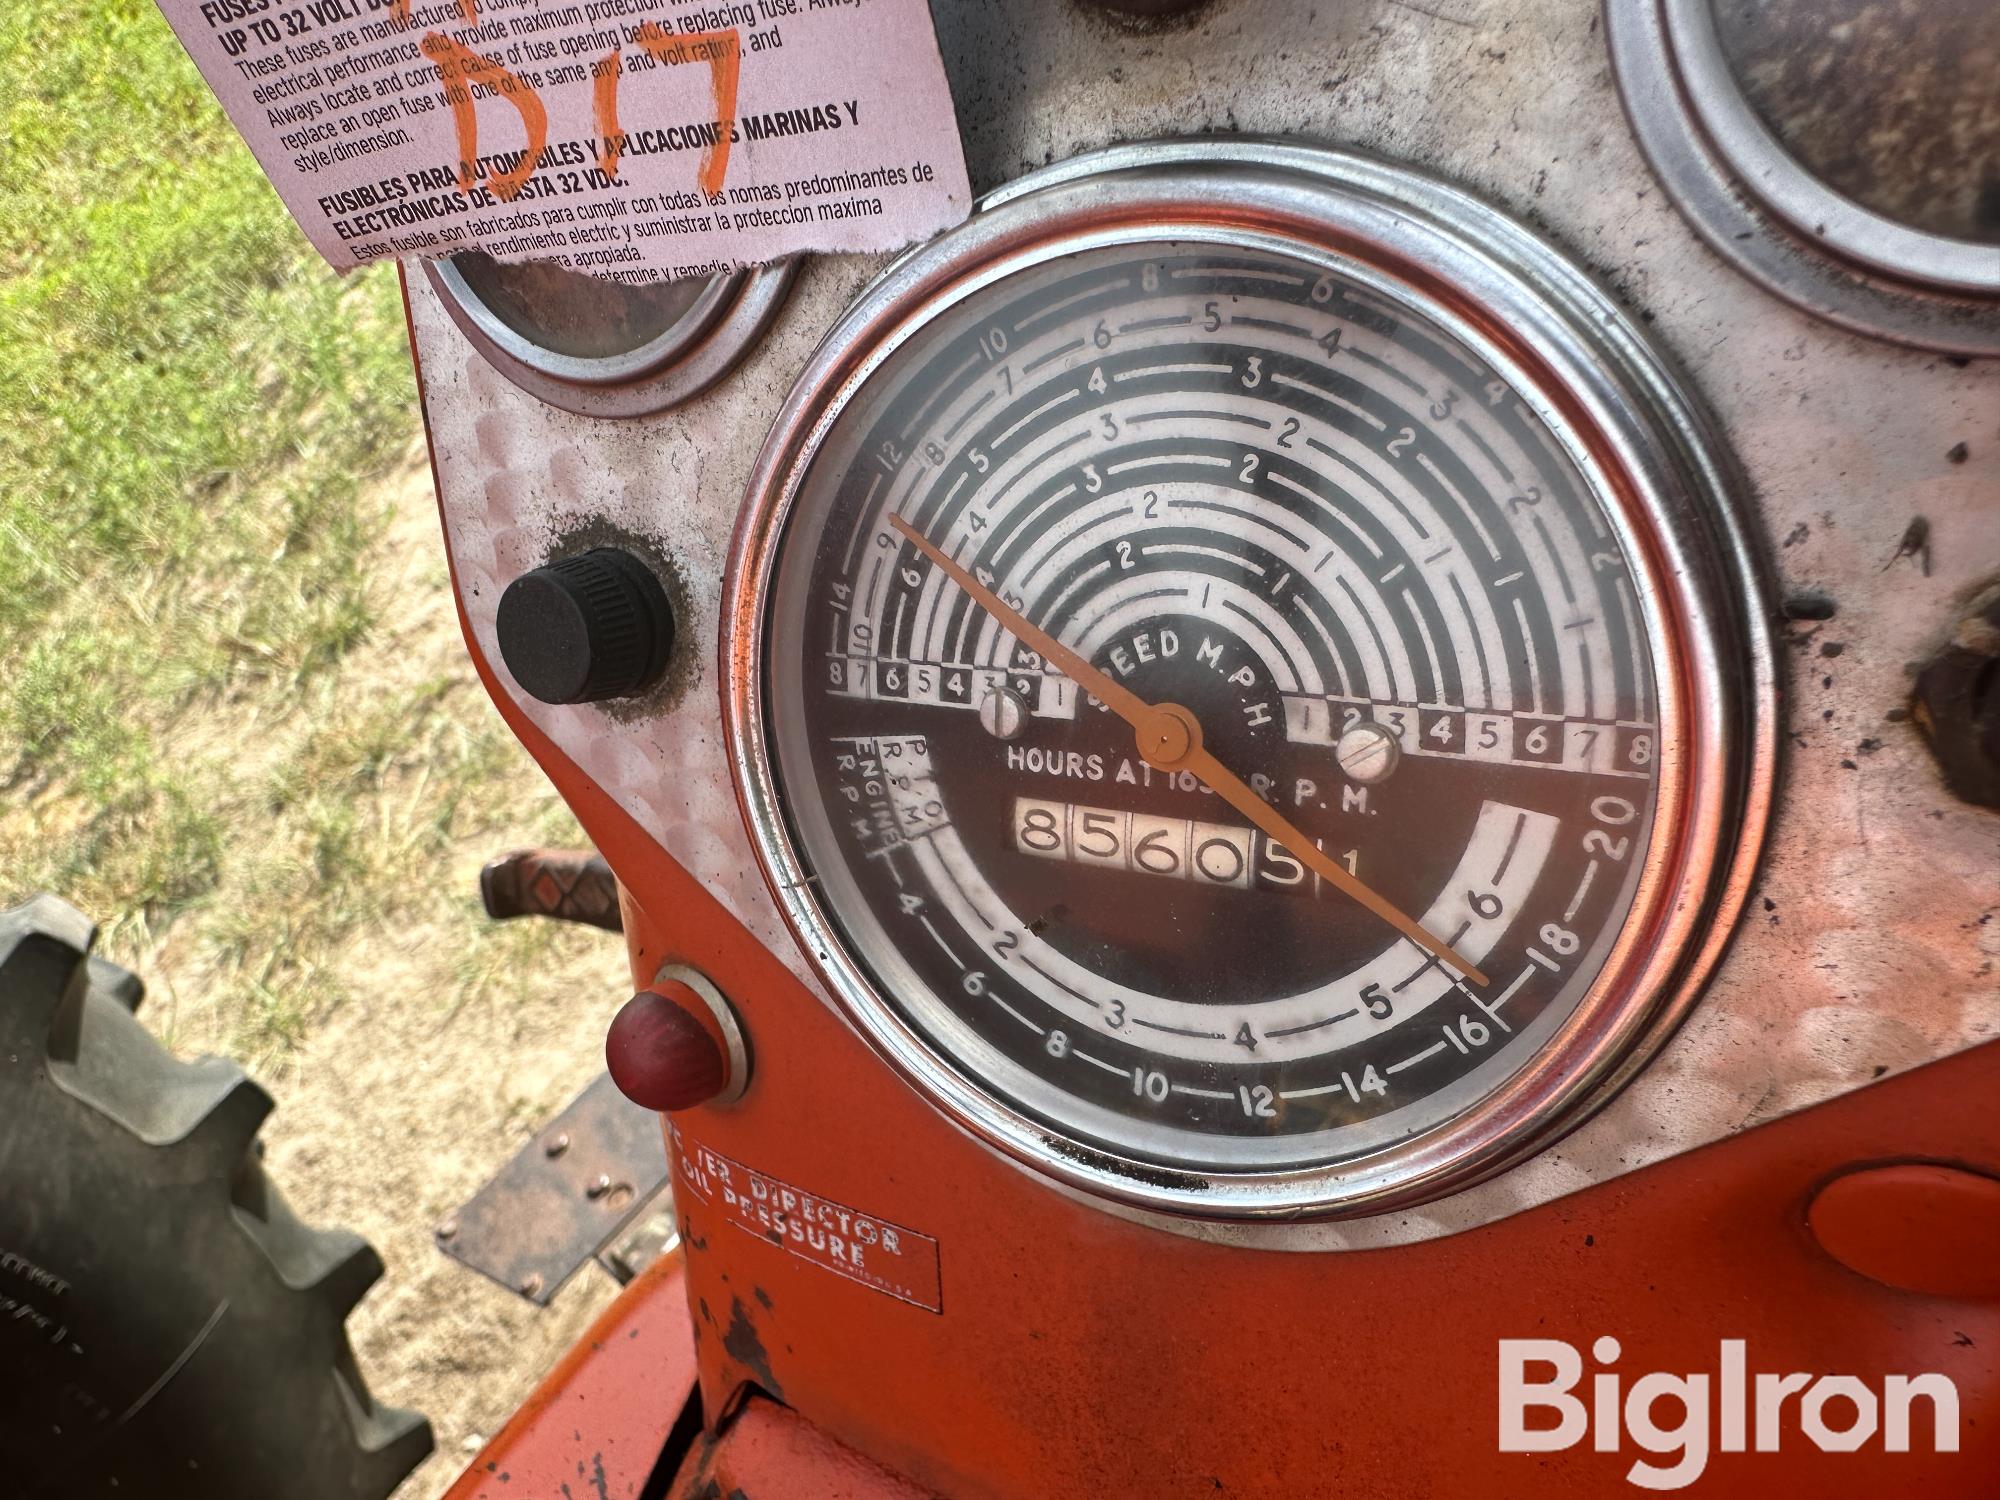 1966 Allis-Chalmers D17 Series IV 2WD Tractor BigIron Auctions